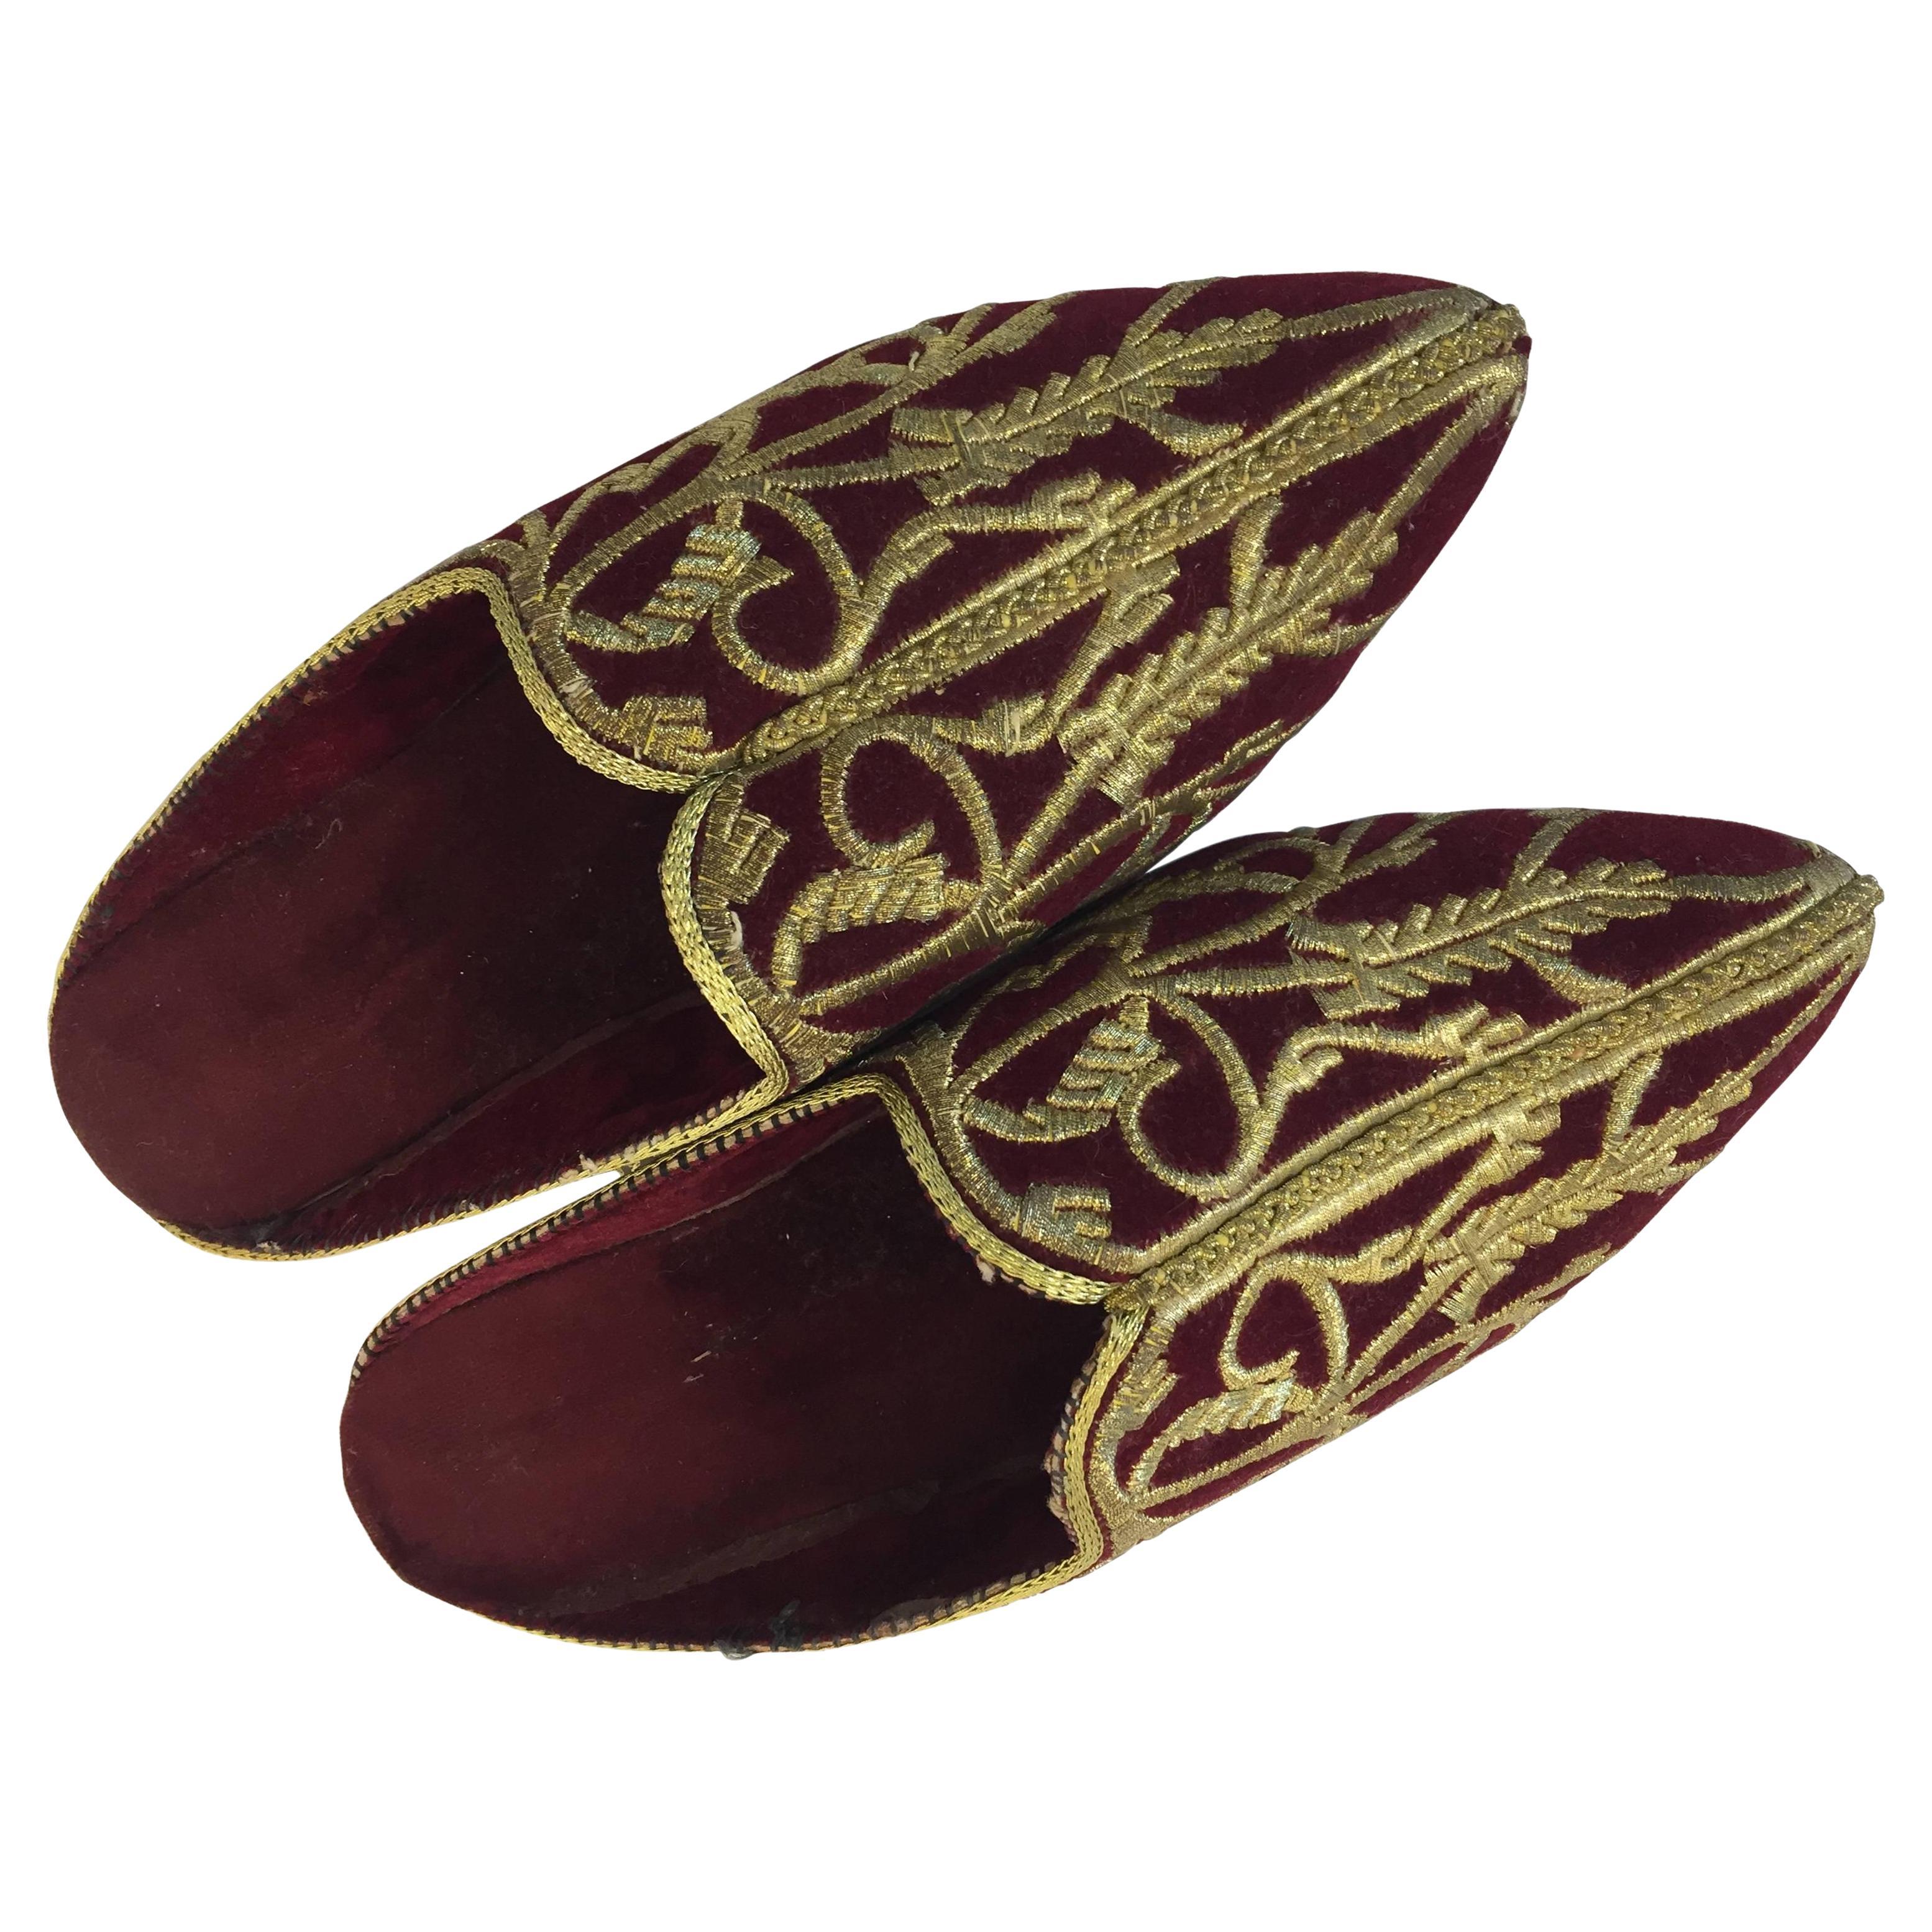 Moroccan Velvet Embroidered with Gold Metallic Thread Slippers Shoes